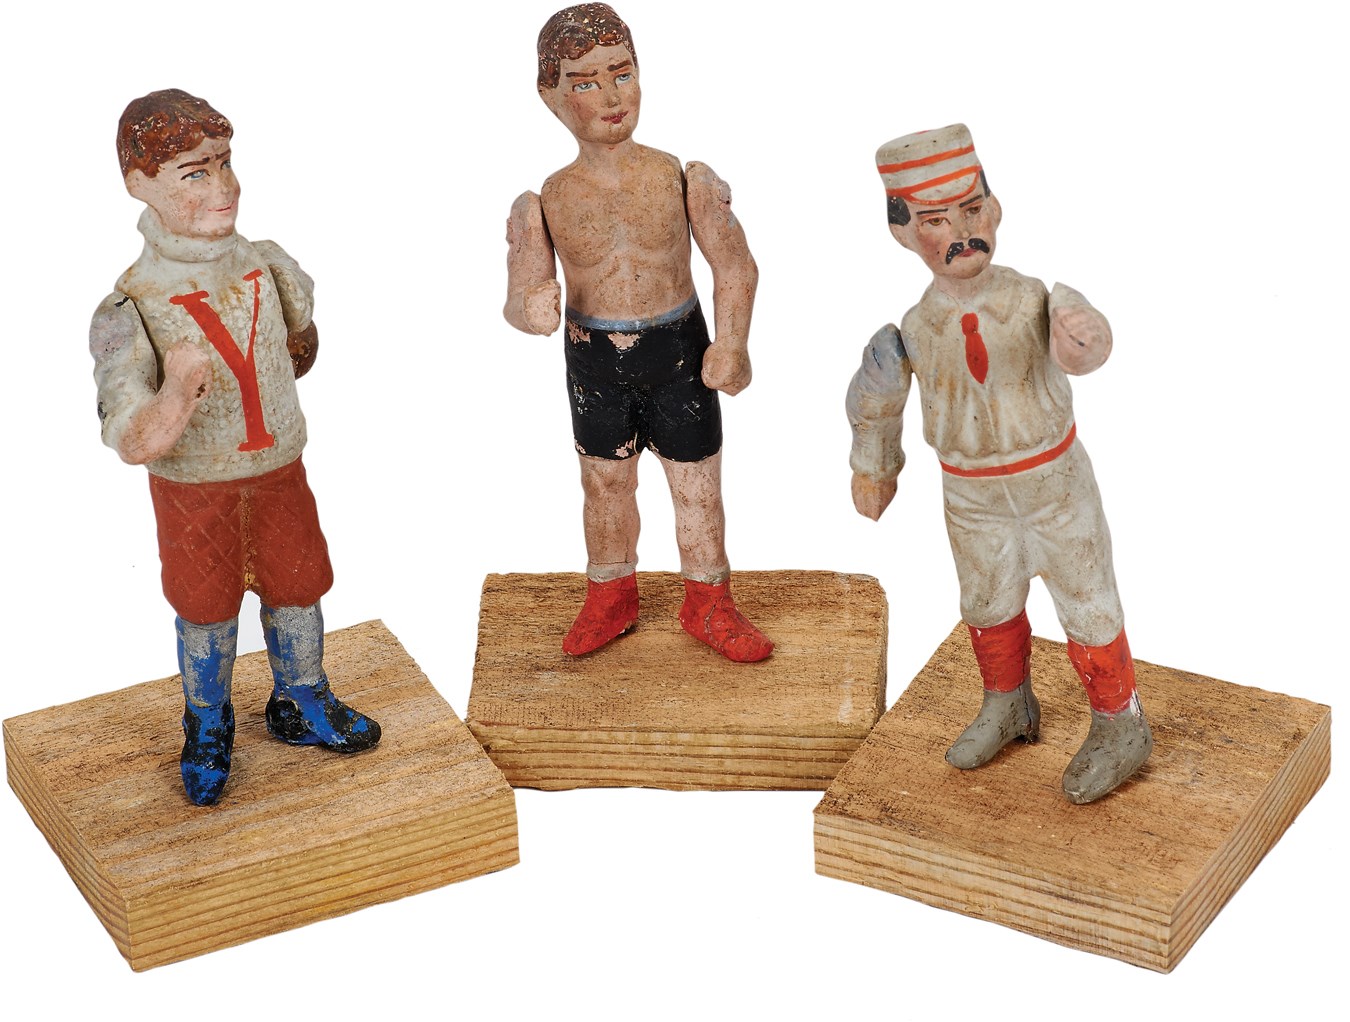 1880s Trio of Articulated Sports Figures in Composition - Baseball, Football & Boxing